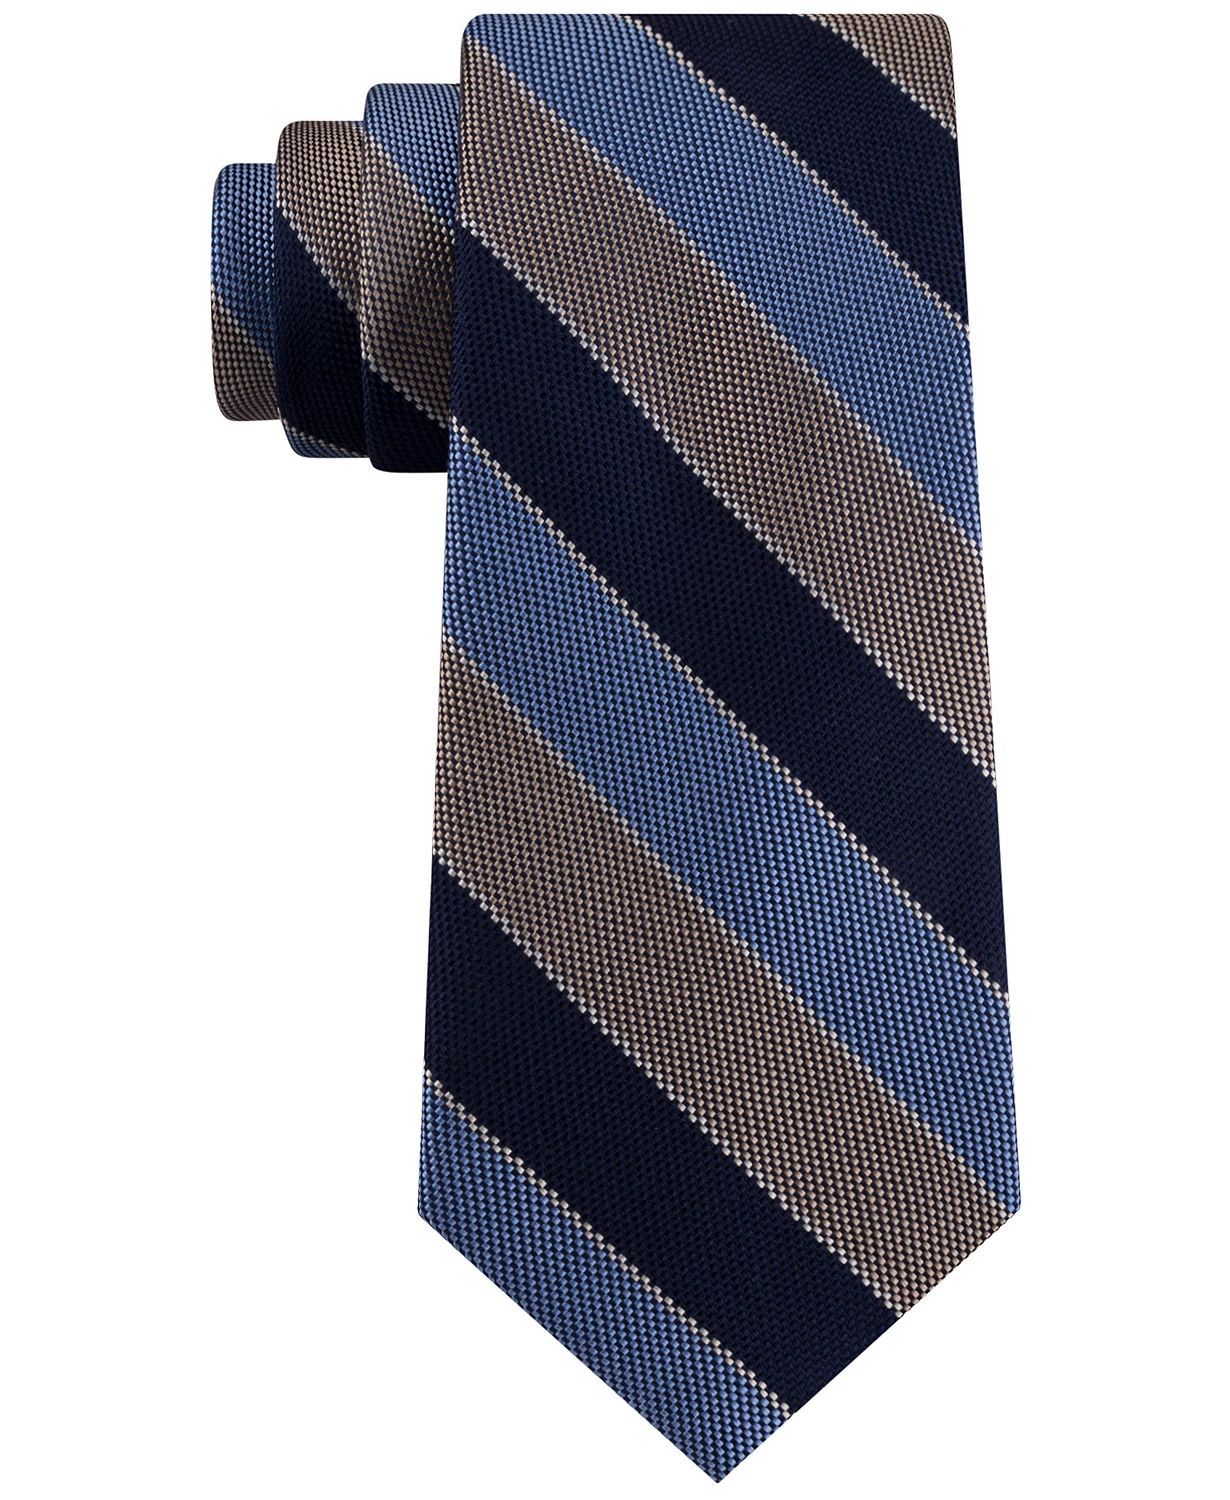 Color: Blues Size: One Size Pattern: Striped Type: Tie Width: Skinny (Material: Silk